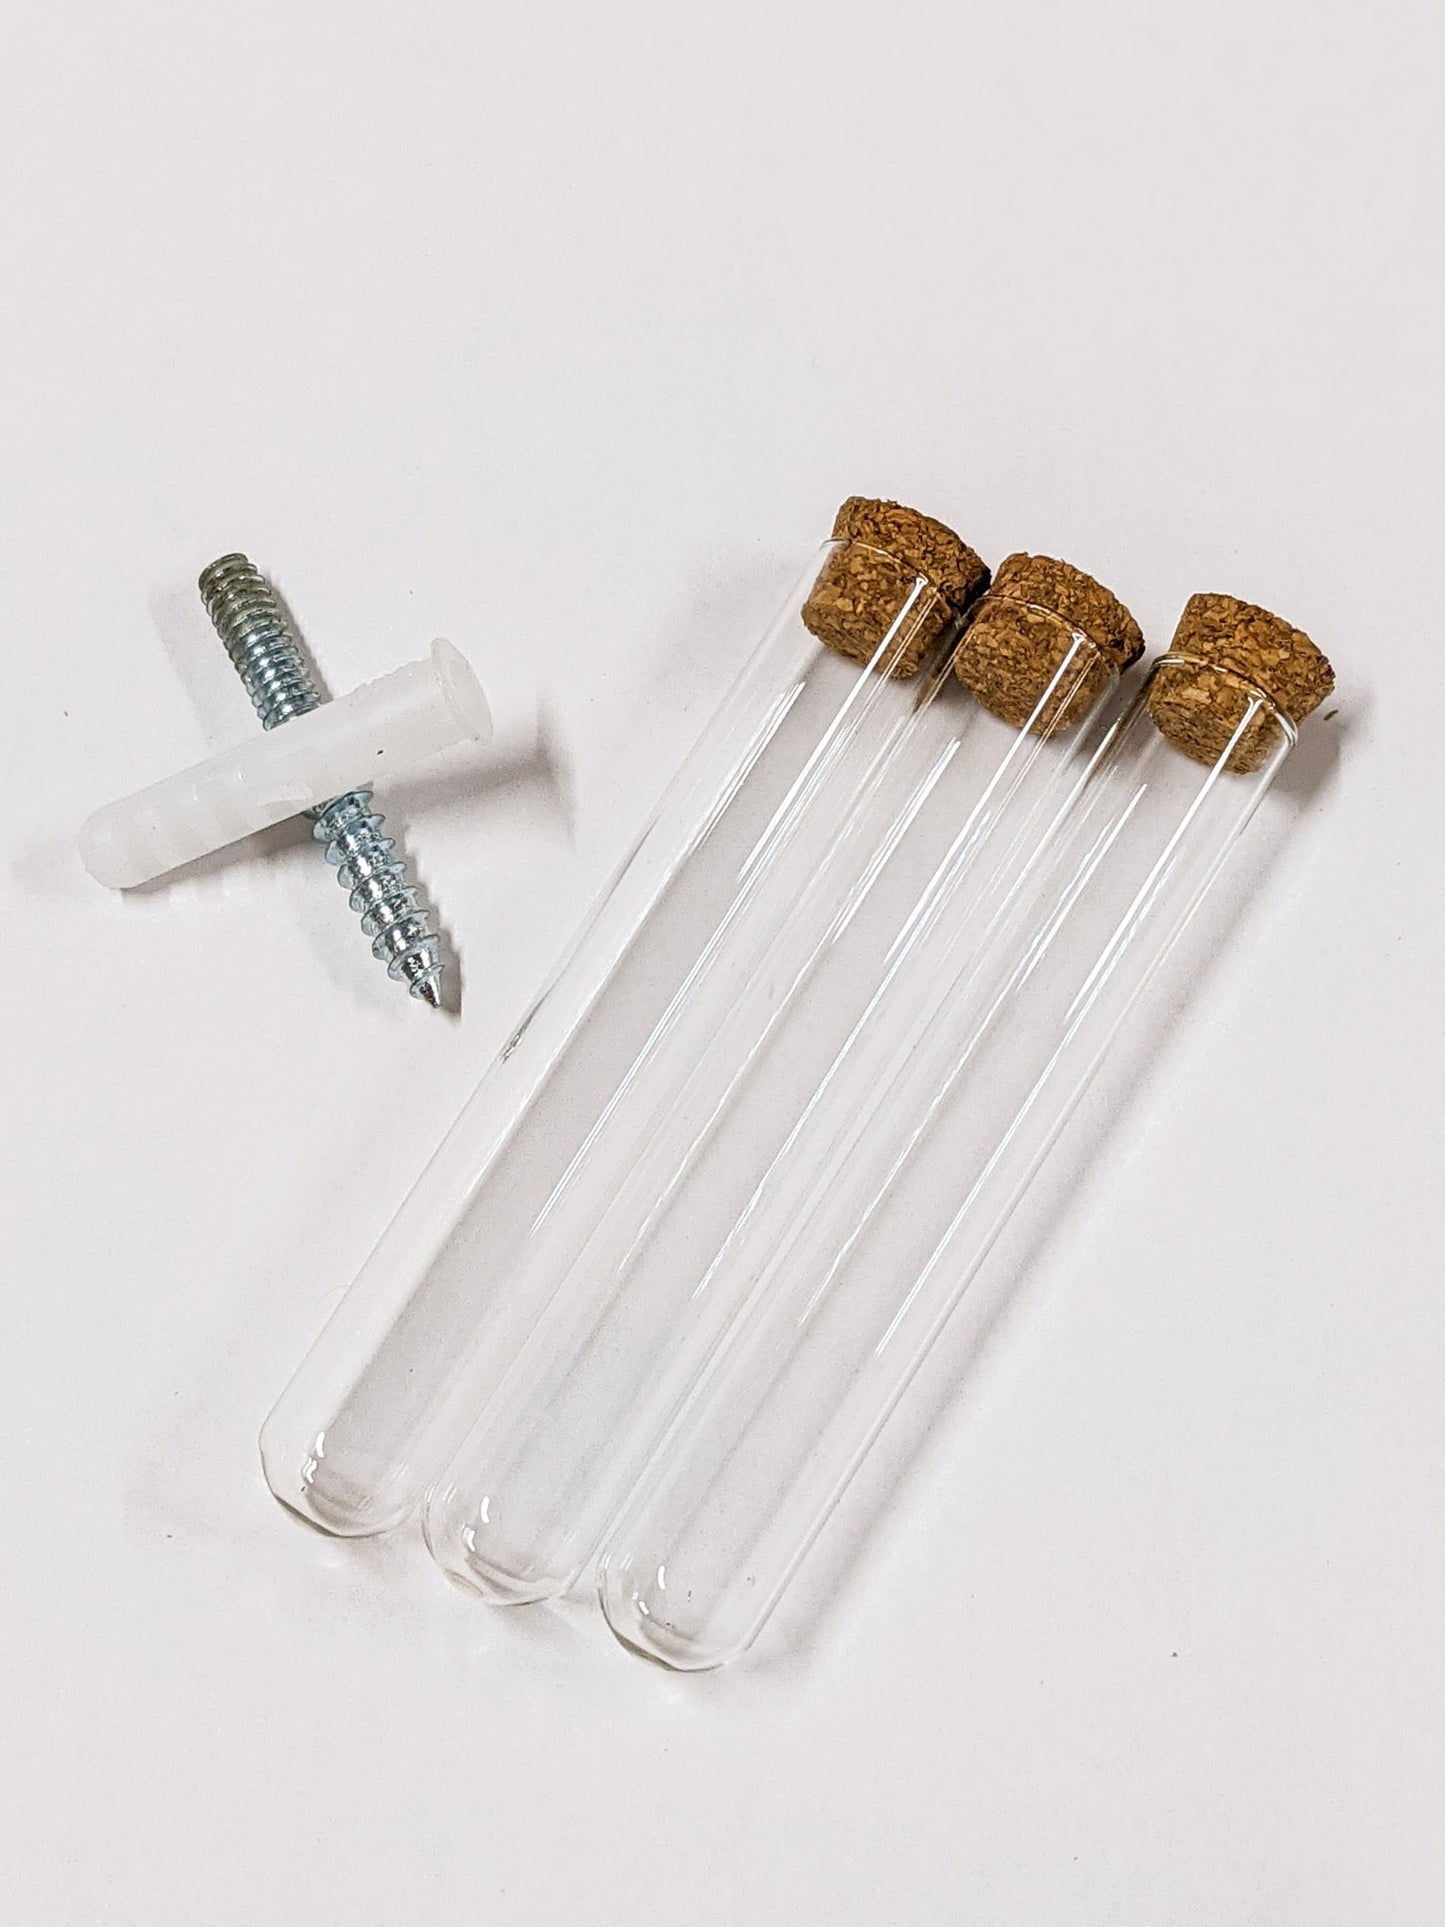 Three propagation station test tubes lay next to each other on a white background. A silver screw and white anchor are placed in an X pattern with their centers touching. The test tubes are corked.